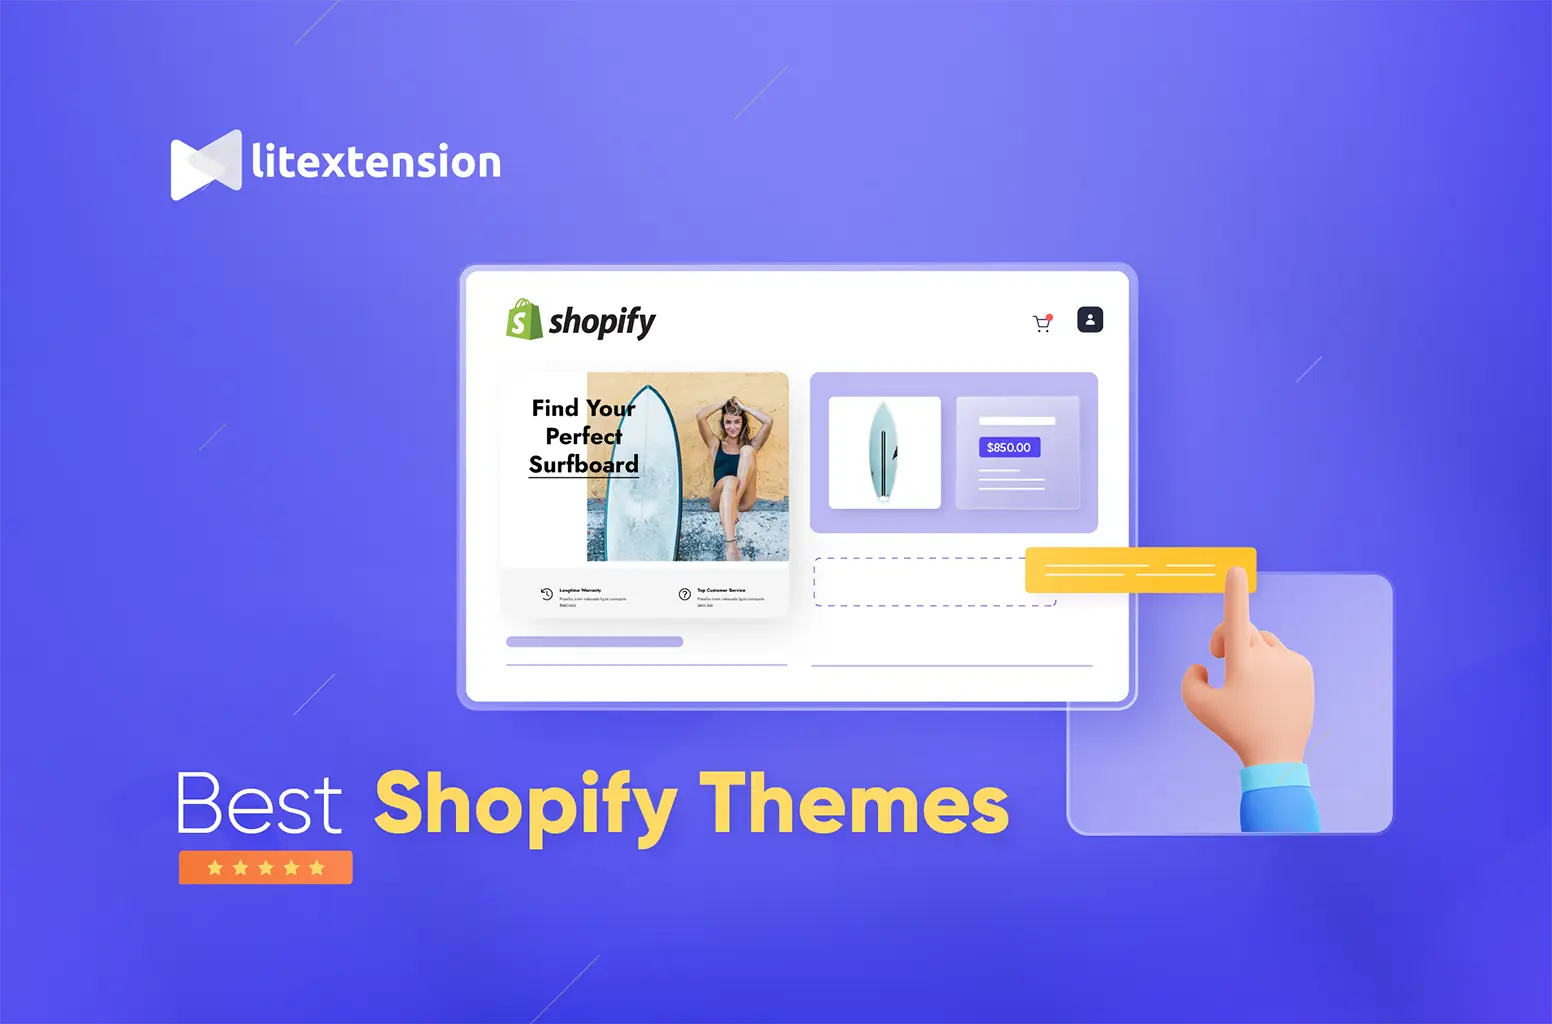 Free Shipping Bar (Dynamic) Shopify App - Your guide to Shopify themes and  apps